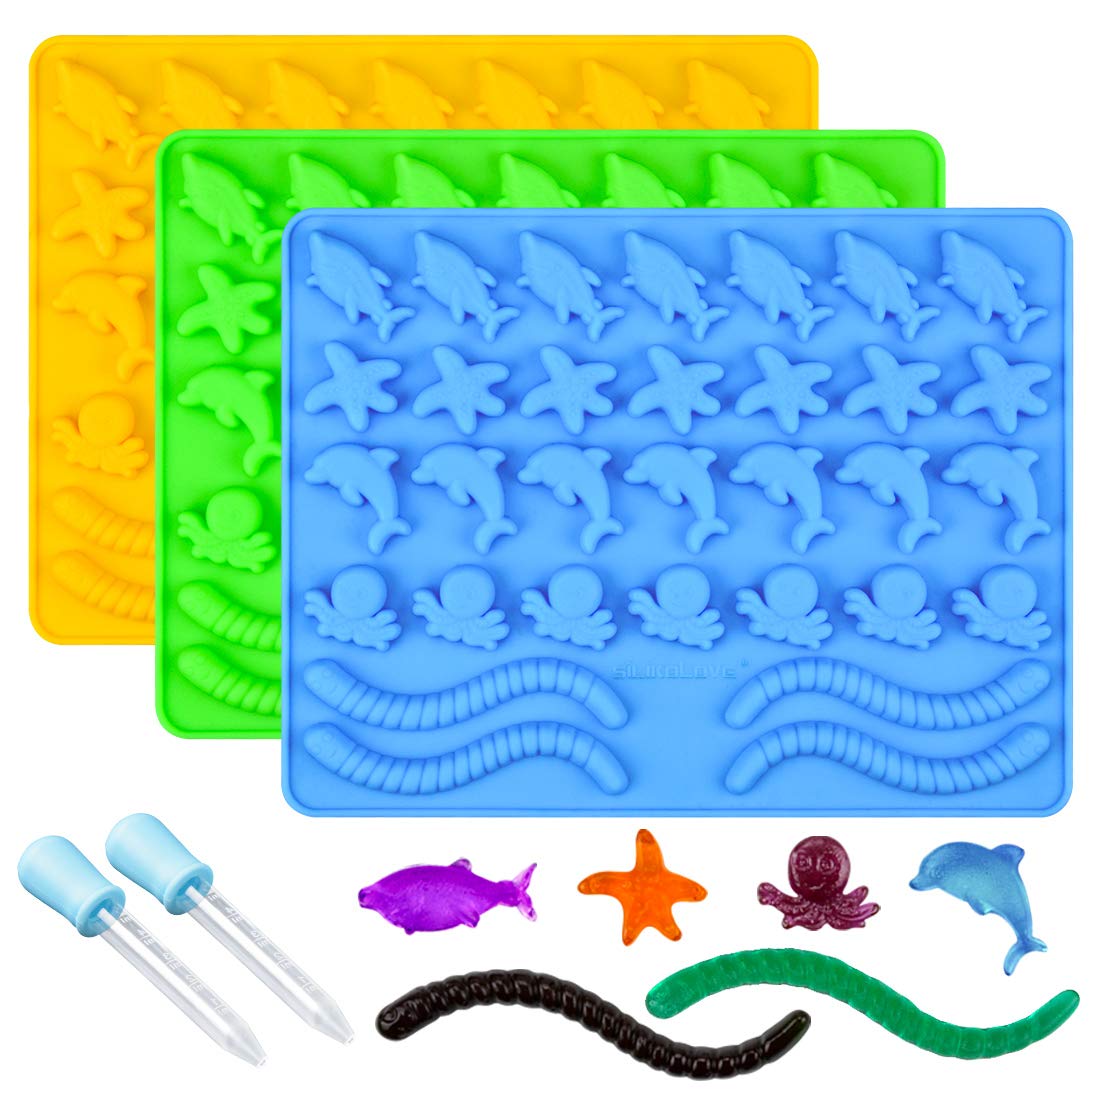 Book Cover Gummy Molds Hard Candy Molds - Candy Molds Silicone Including Worms, Starfishs, Dolphins, Octopus, Sharks Sea Mold BPA Free, Pinch Test Approved Pack of 3 Ocean Molds